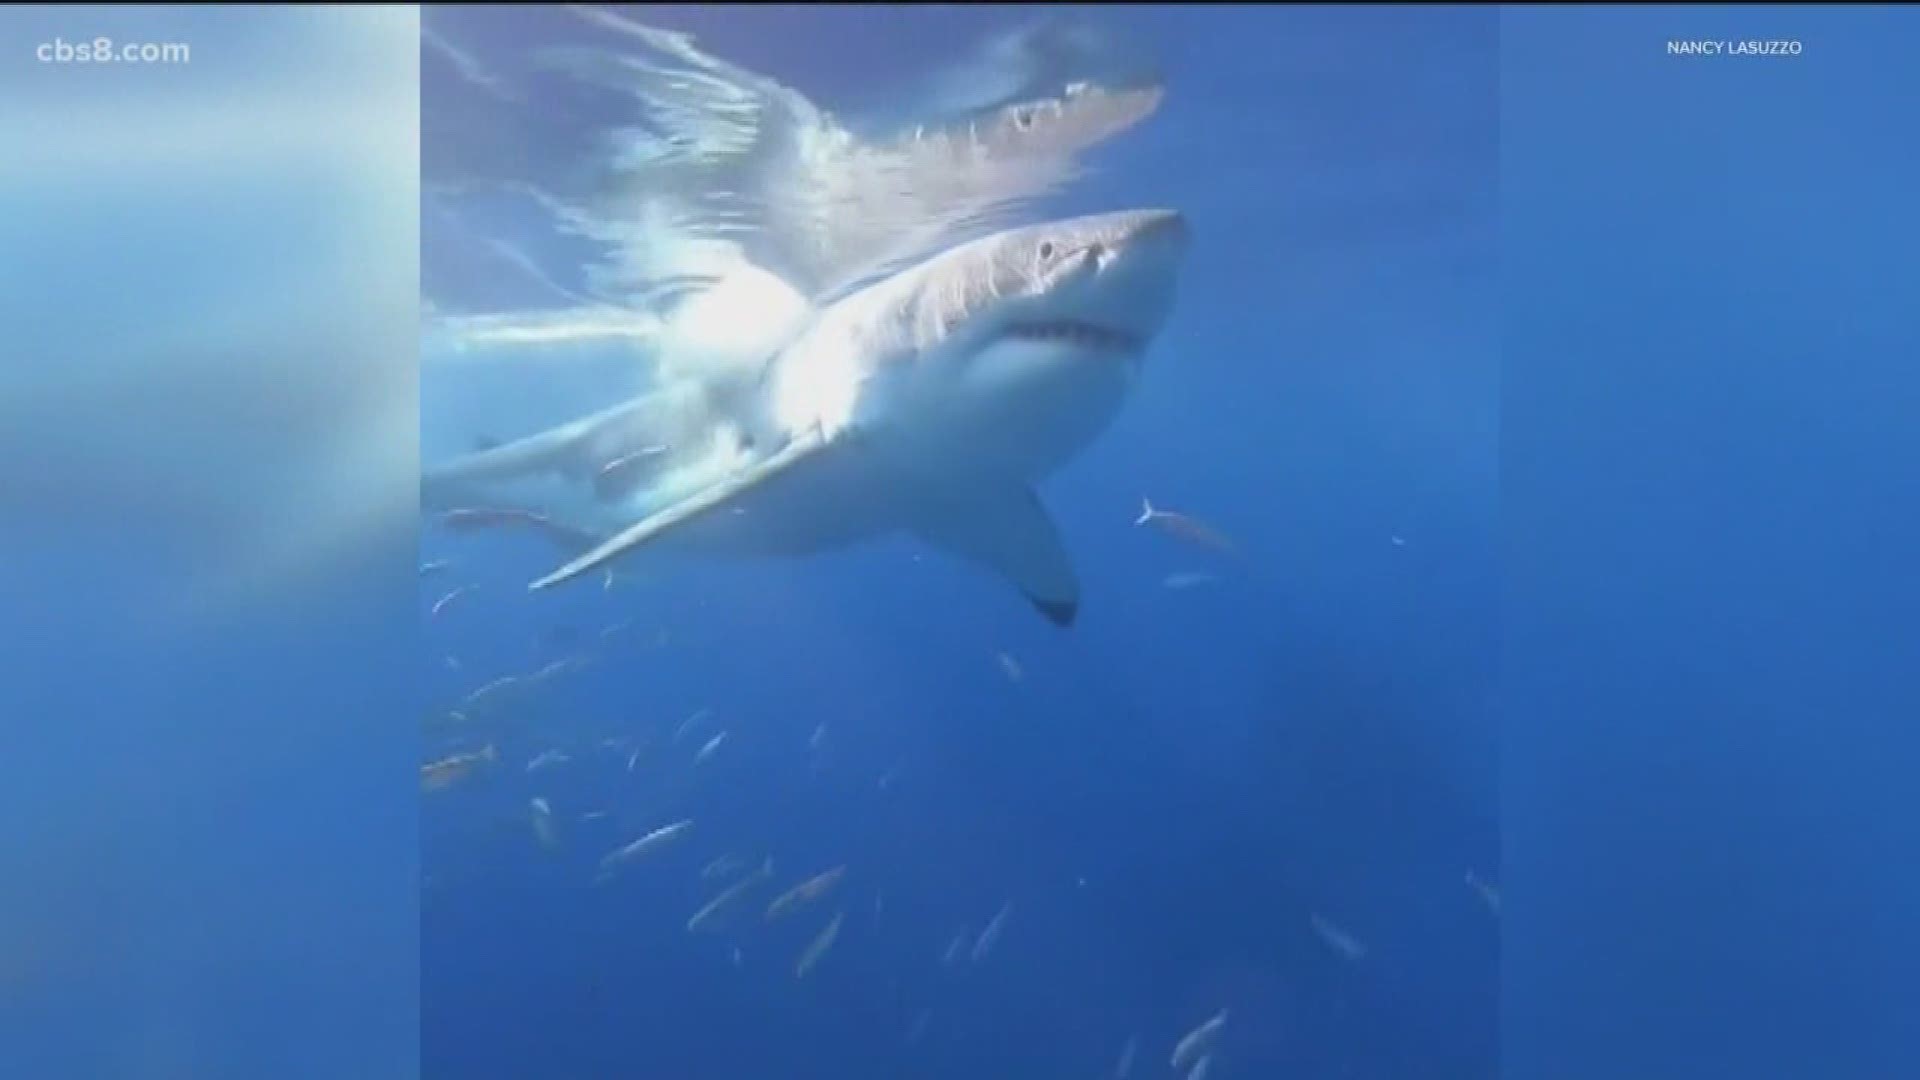 A shark diving tour group out of San Diego came face to face last Saturday with a 17-foot great white shark as it took a big bite out of their cage.